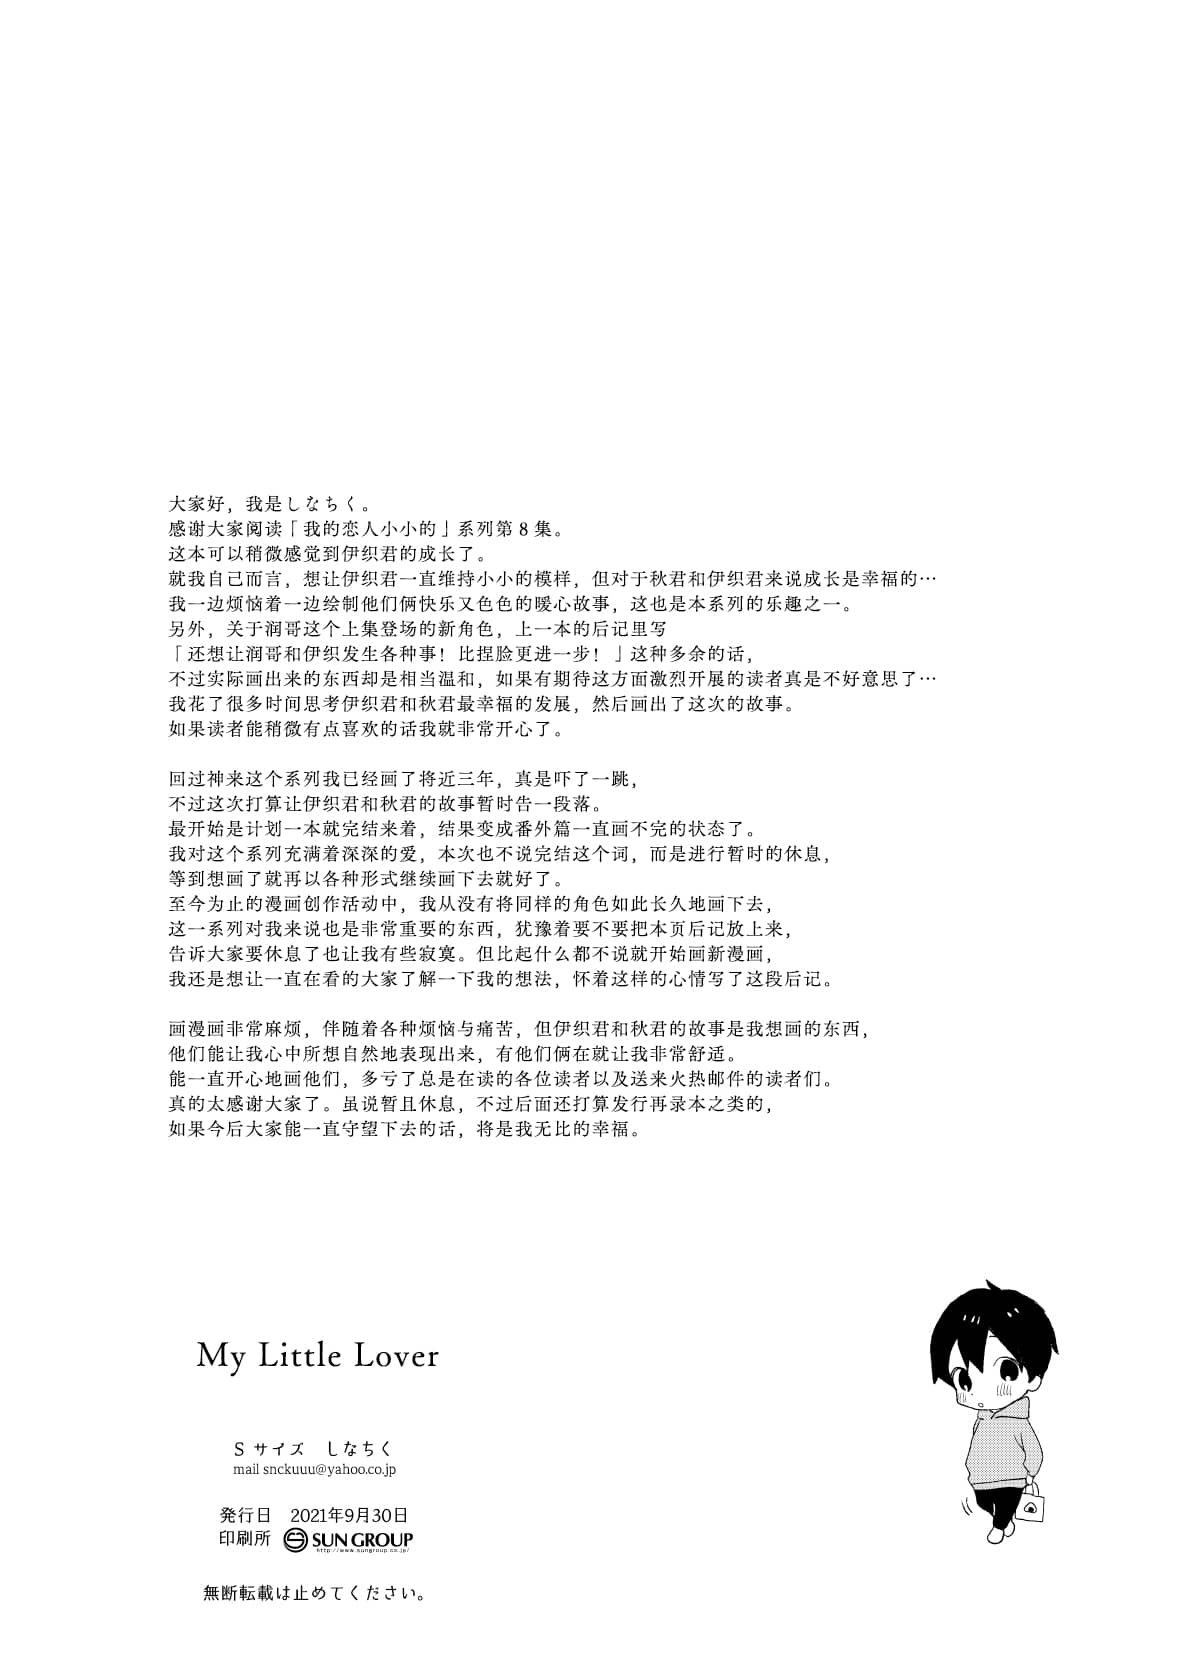 My Little Lover | 我的小恋人